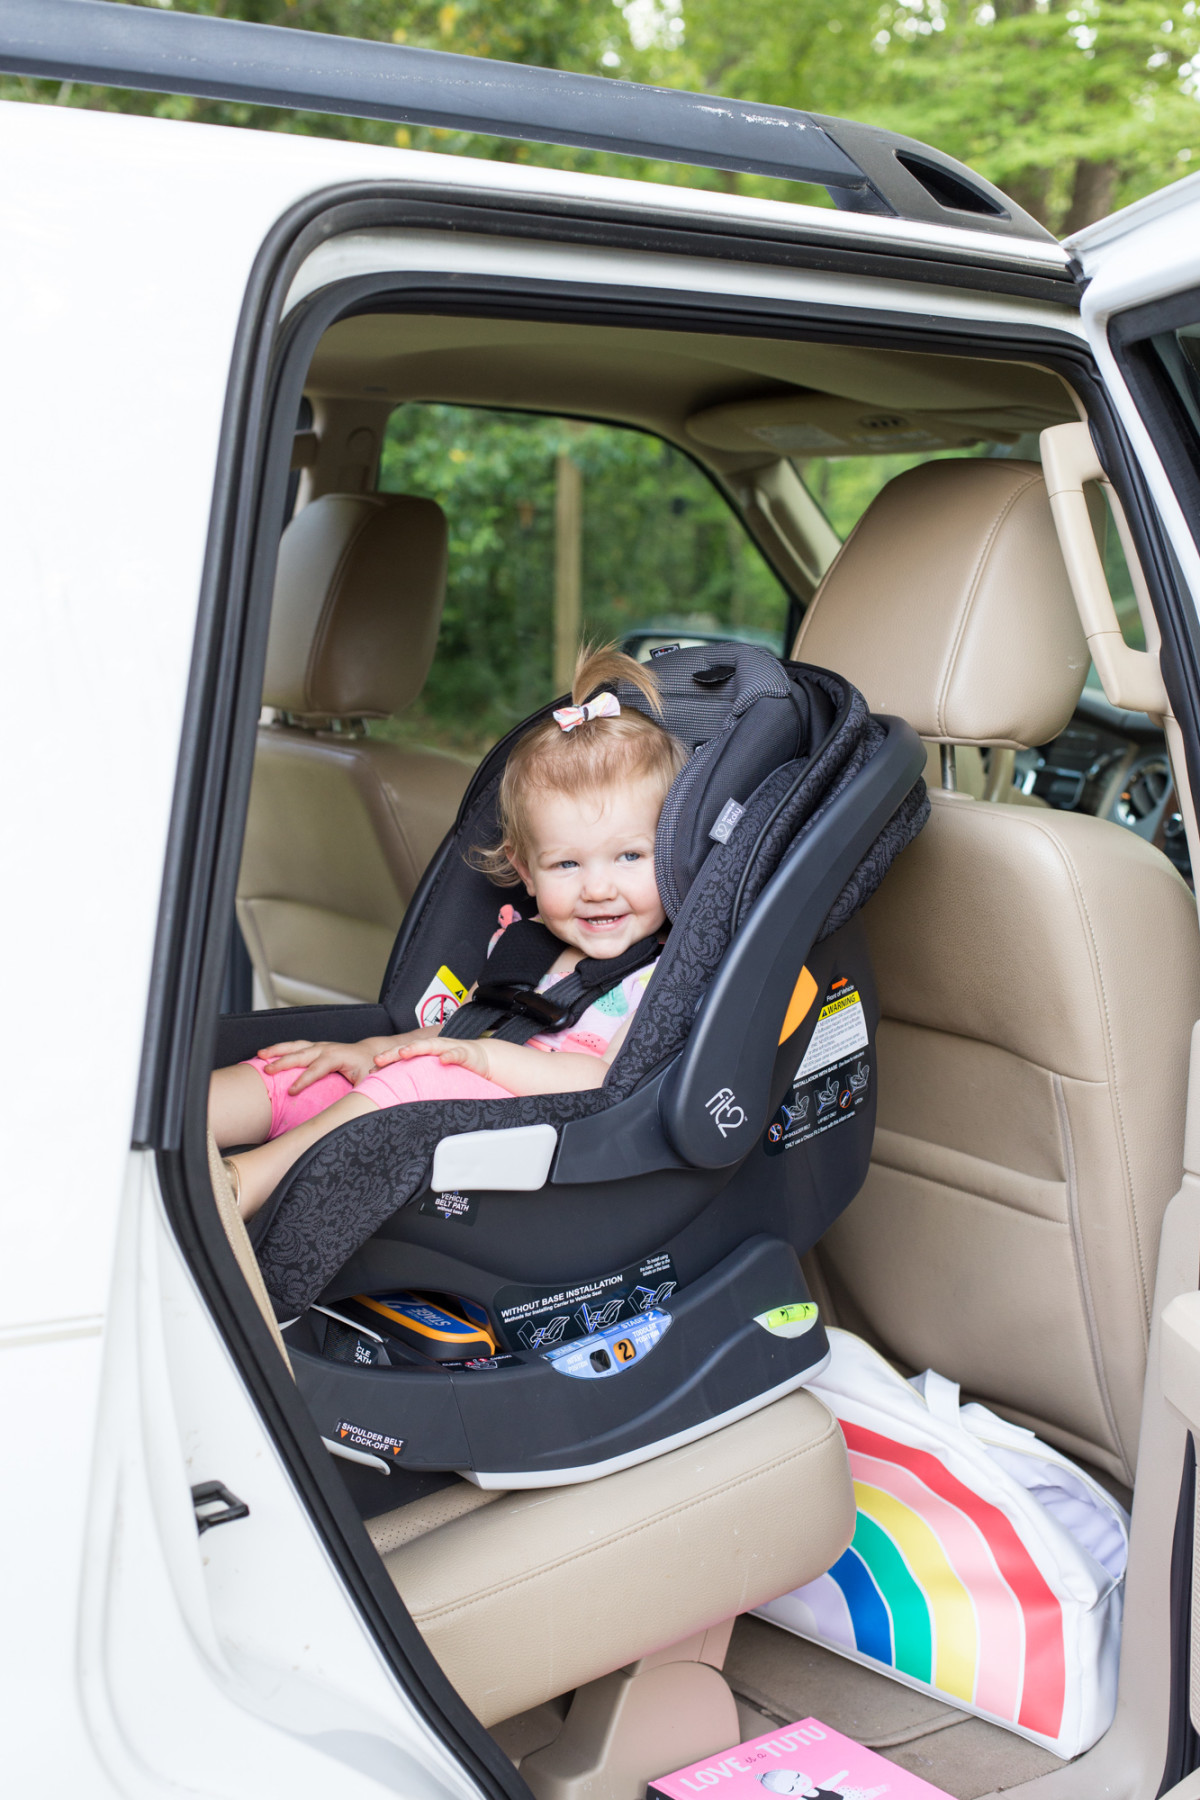 The Fit 2 Car Seat That Lasts Until Baby Is 2 Lay Baby Lay